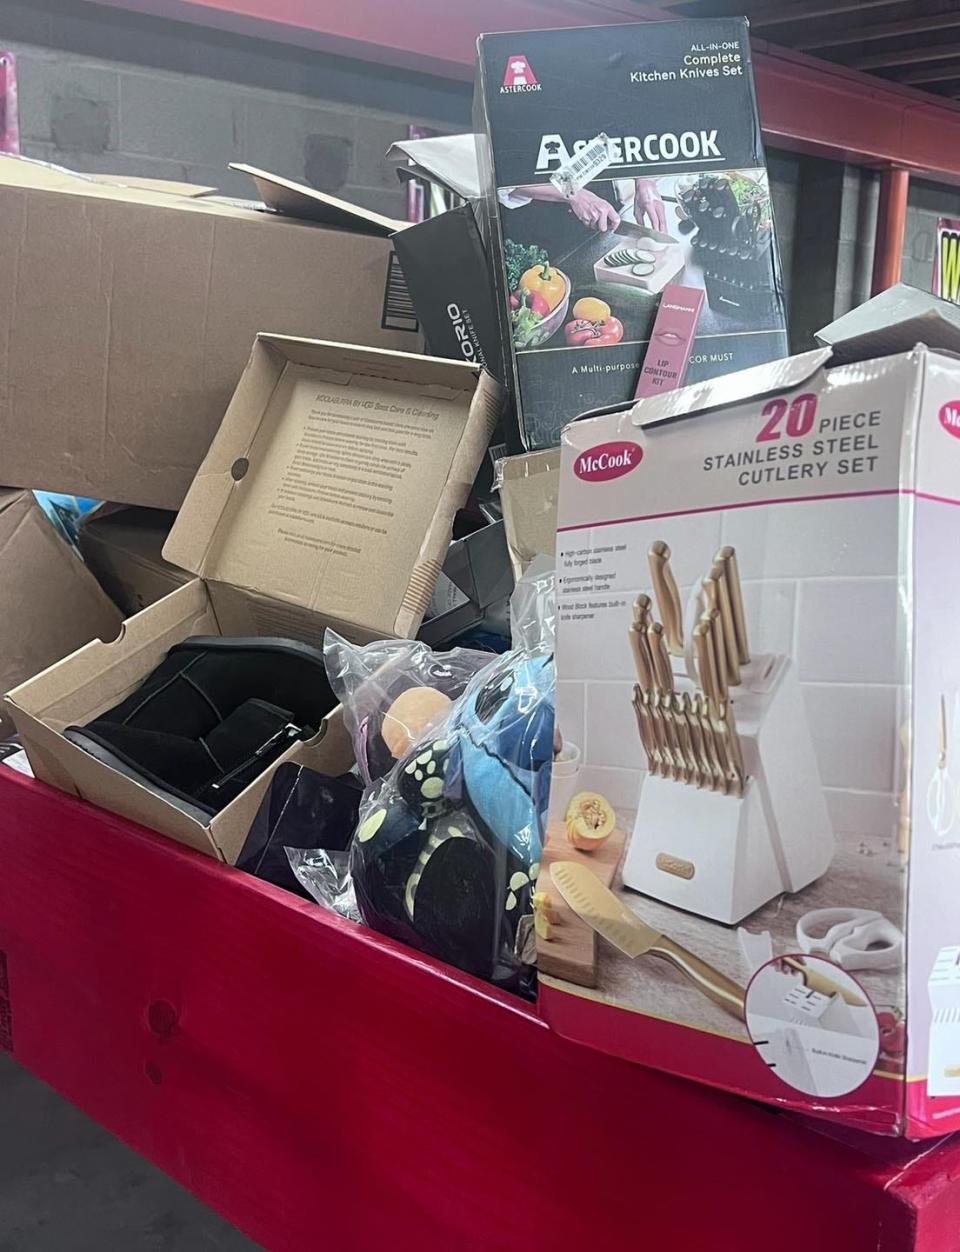 Monster Lots, located at 4300 Rosa Ave., focuses on selling binned retail goods. Customers can sift through bins containing household items, electronics and apparel.